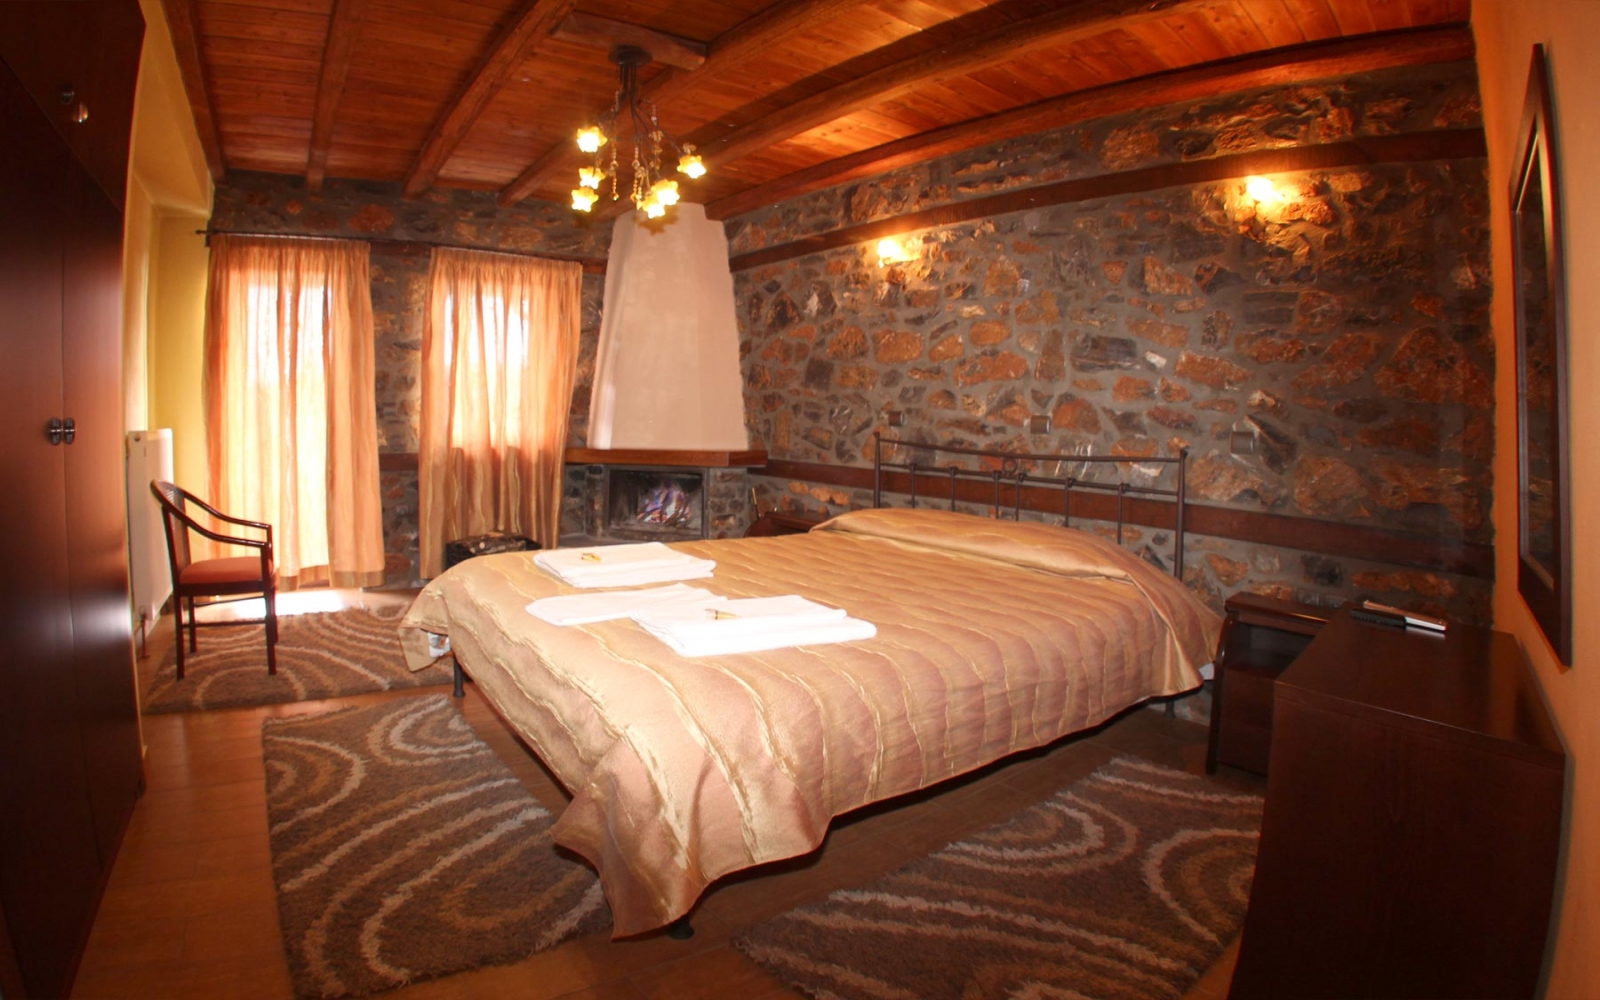 Deluxe double room with fireplace